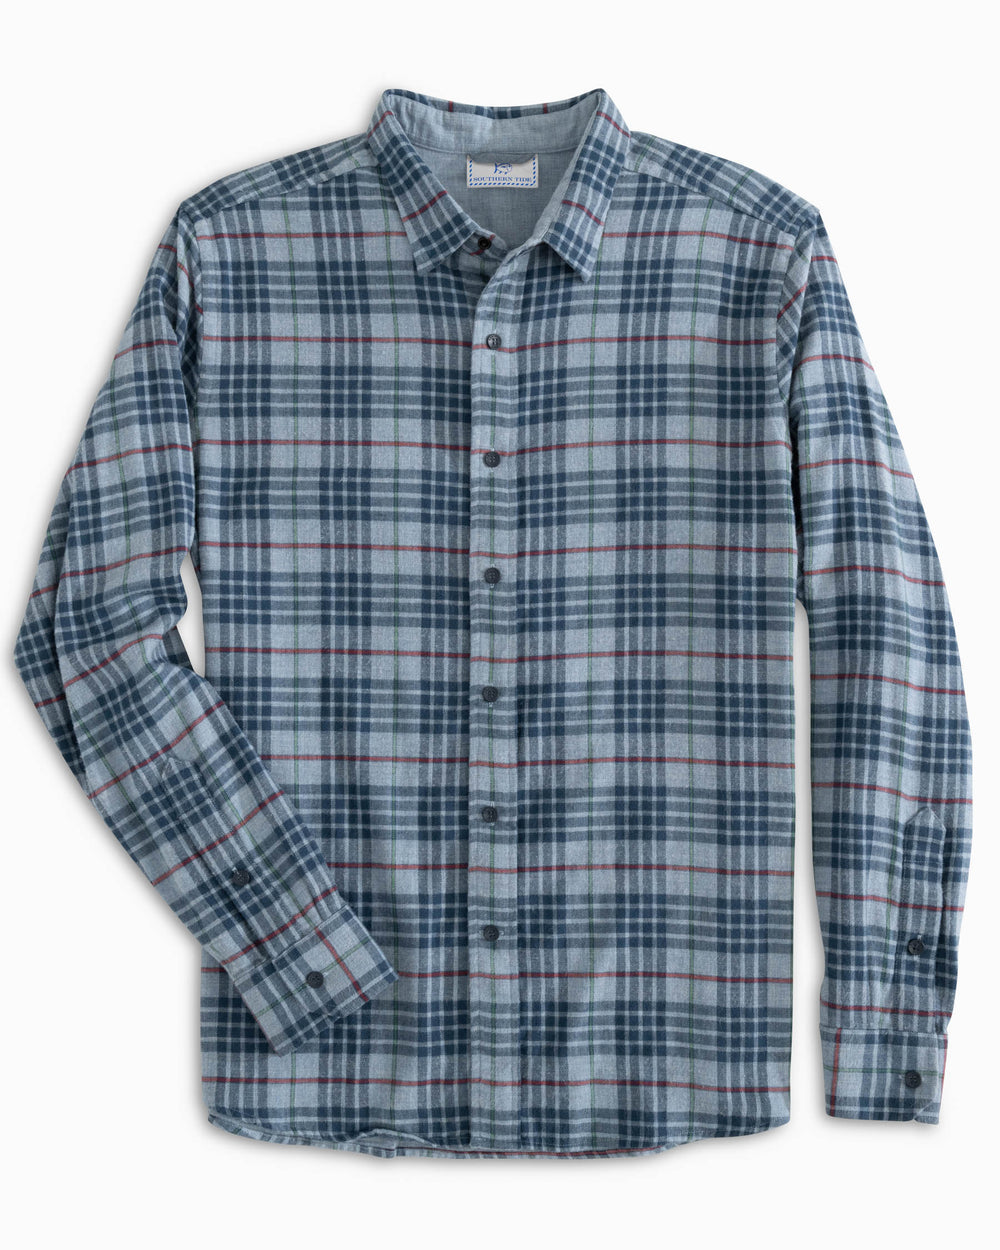 The front view of the Southern Tide Payton Heather Reversible Plaid Sport Shirt by Southern Tide - Heather Dolphin Gray